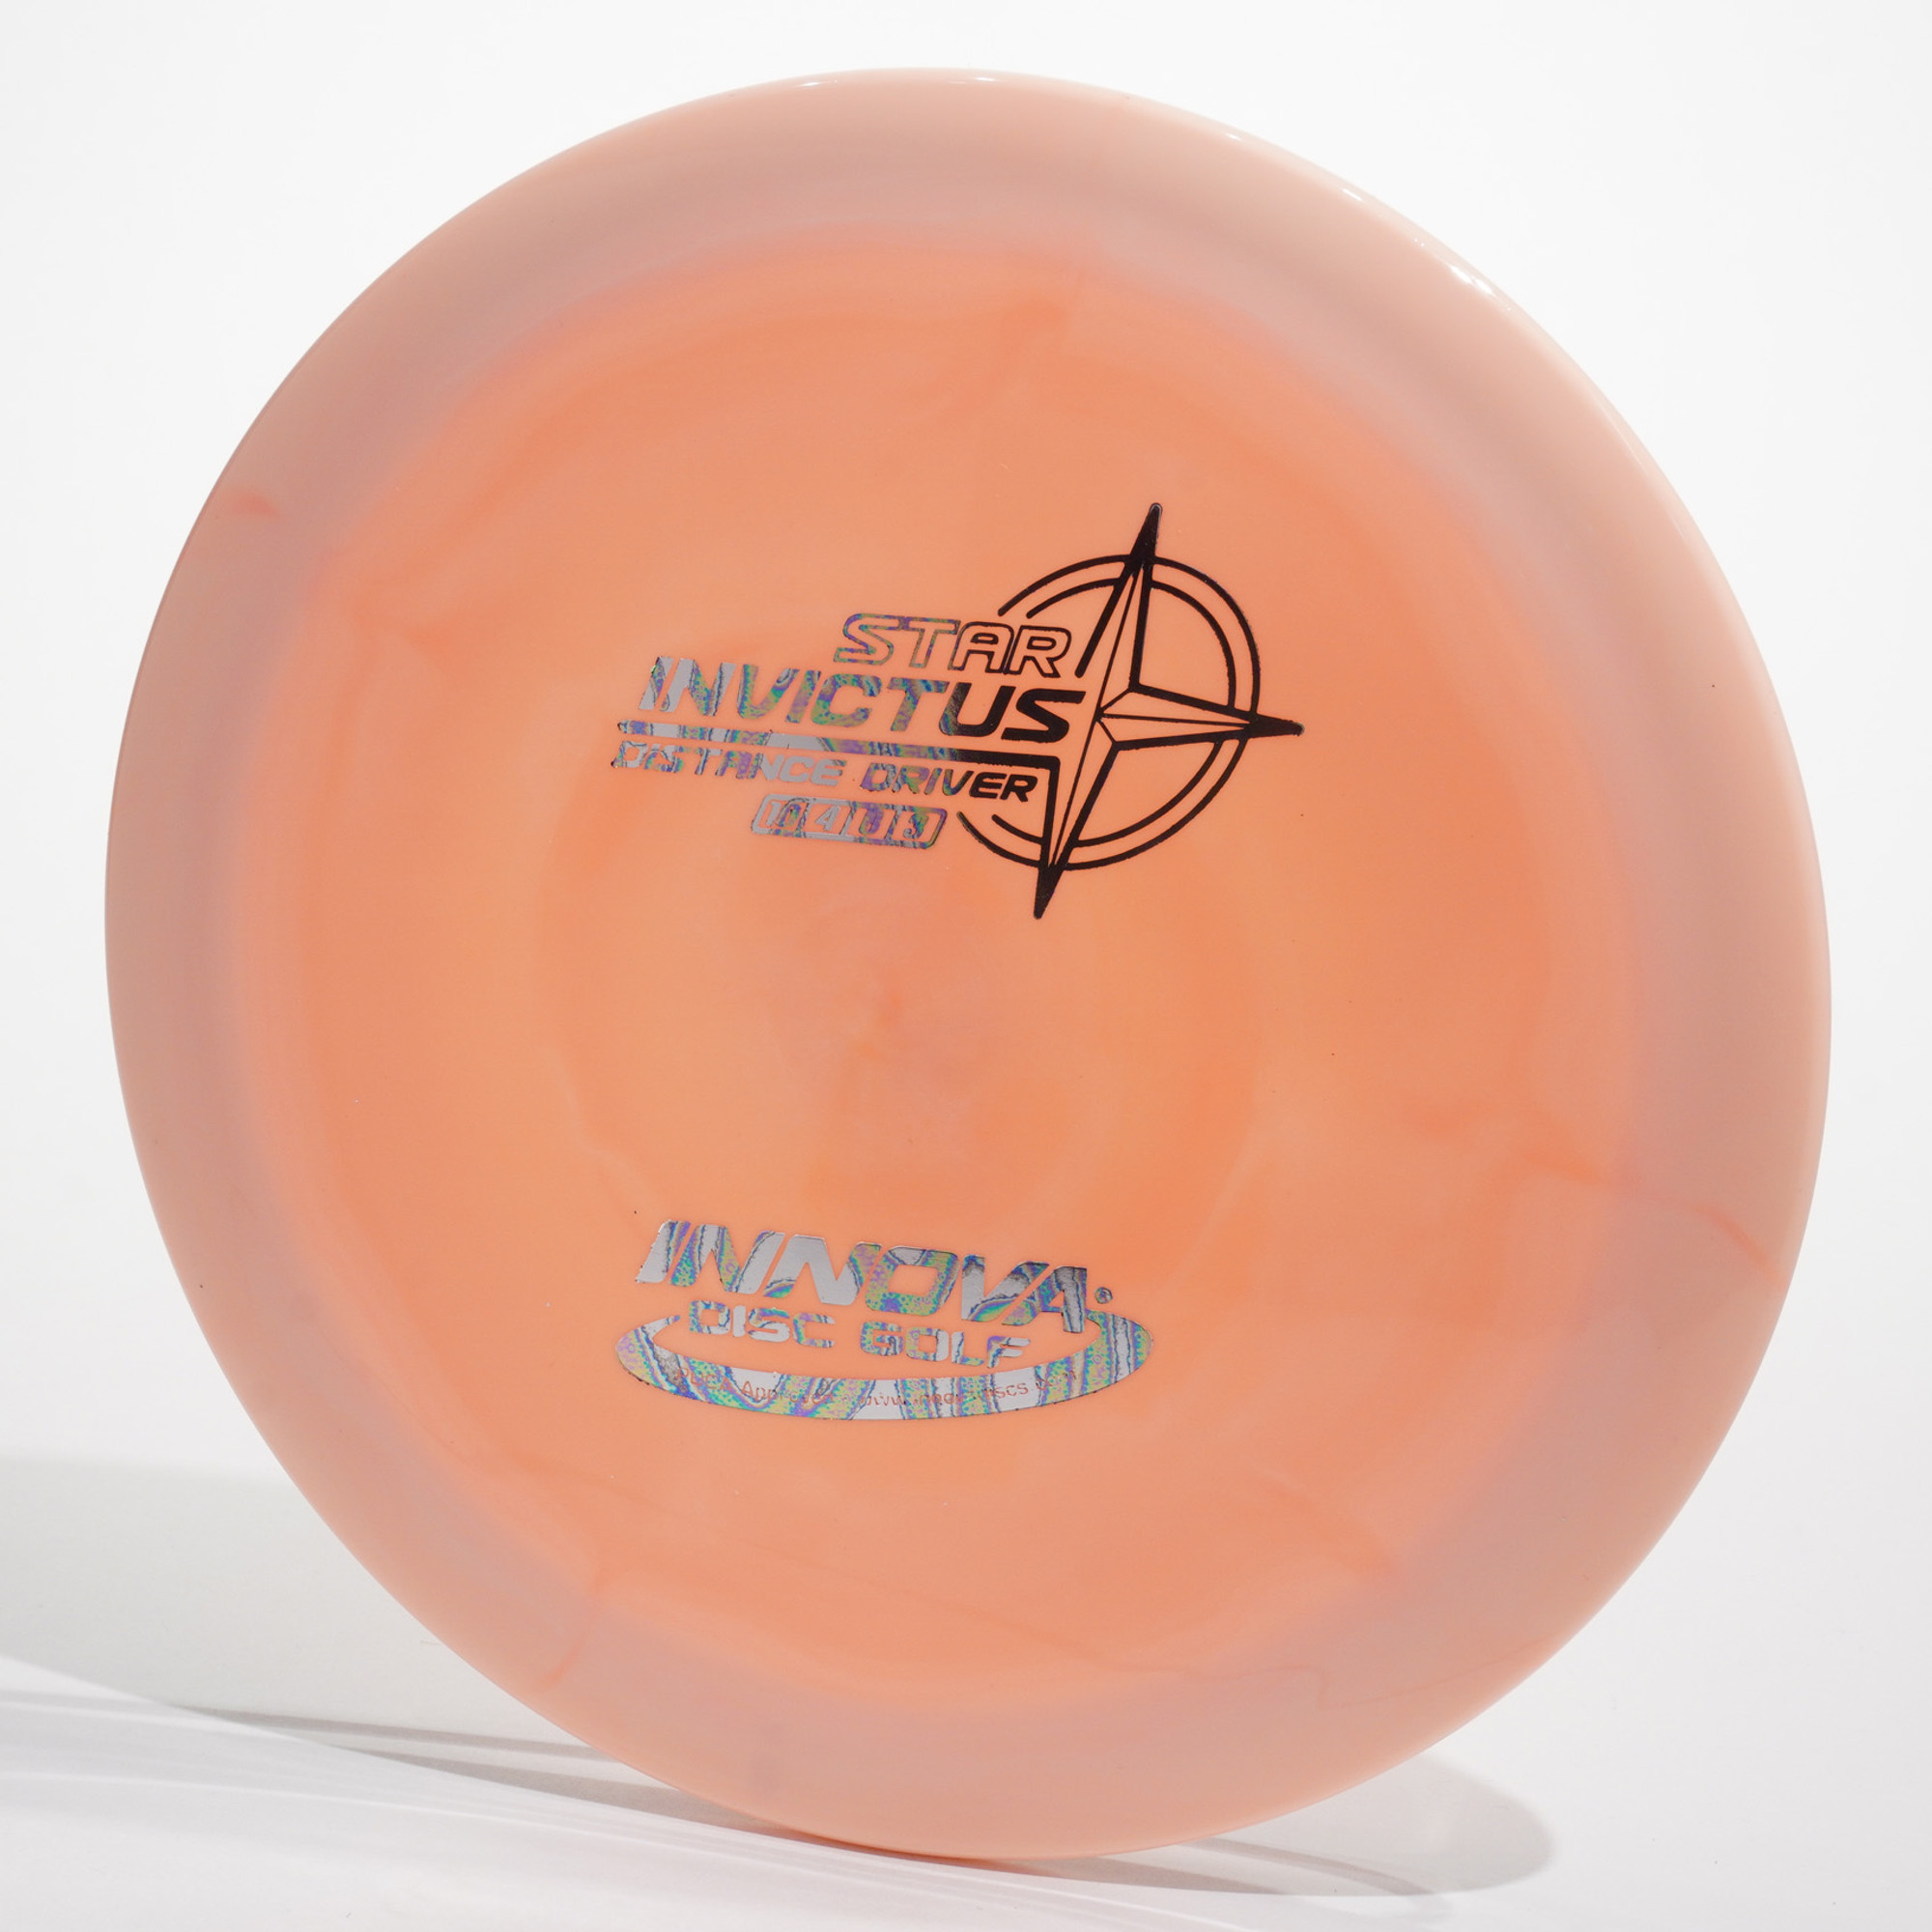 Innova Invictus (Star) - THE WRIGHT LIFE ACTION SPORTING GOODS STORE